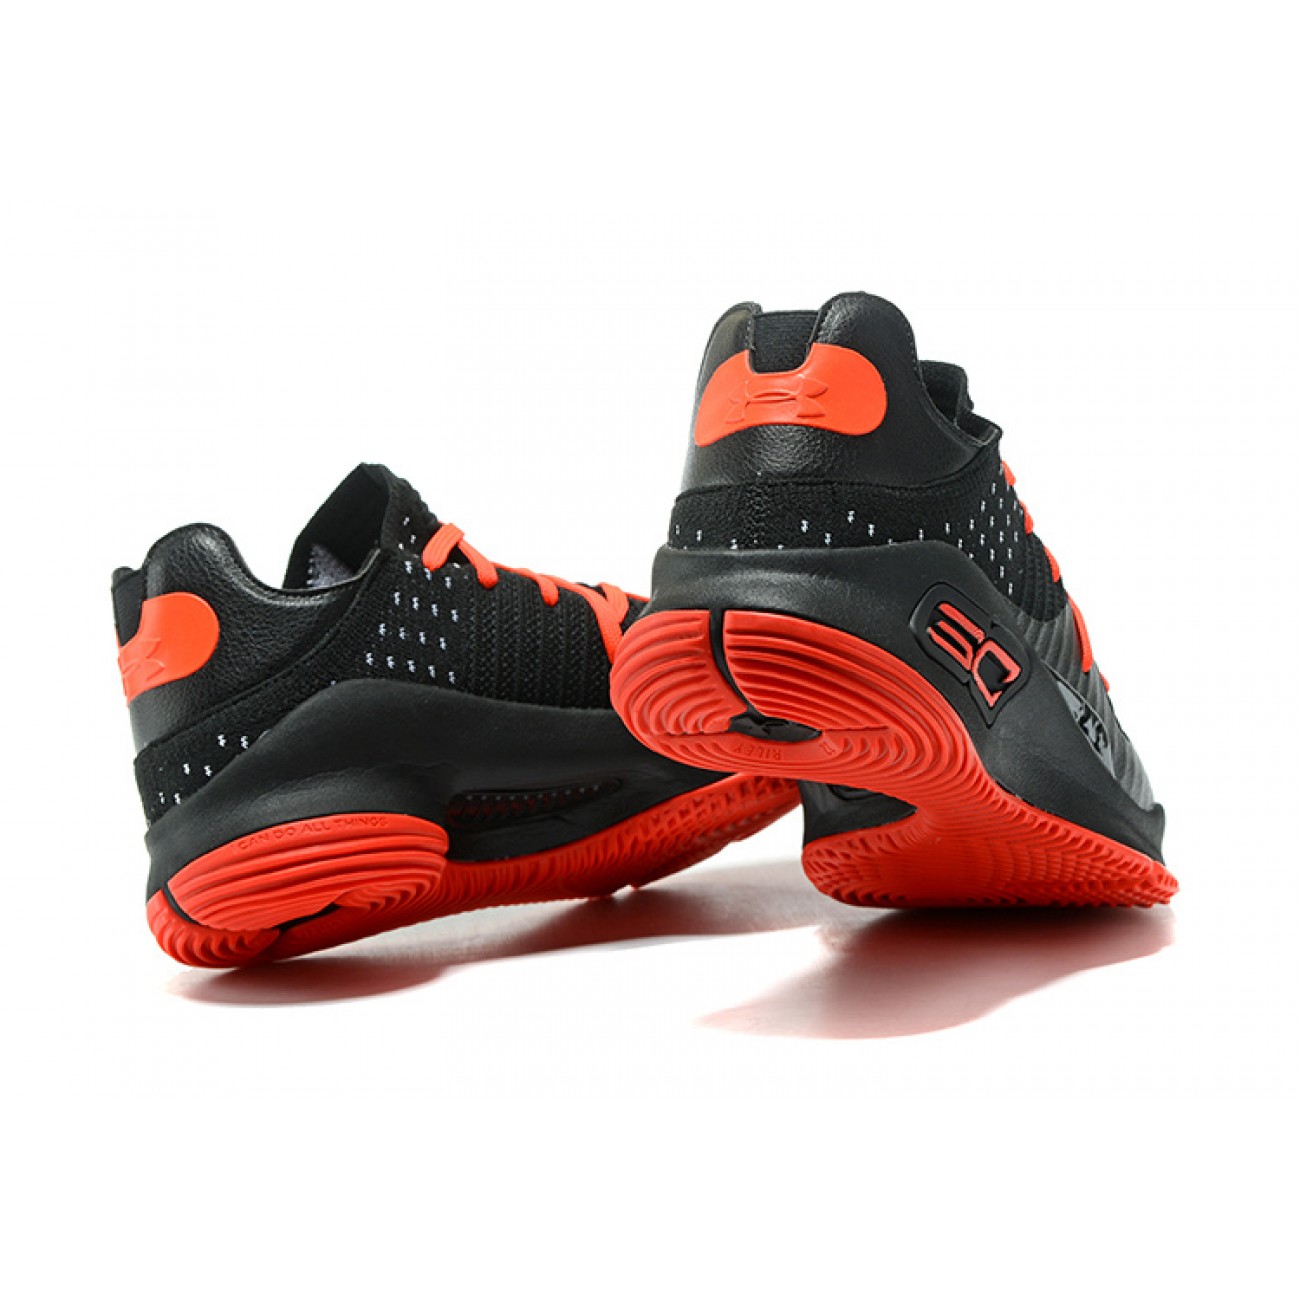 Under Armour UA Curry 4 Low Black/Red